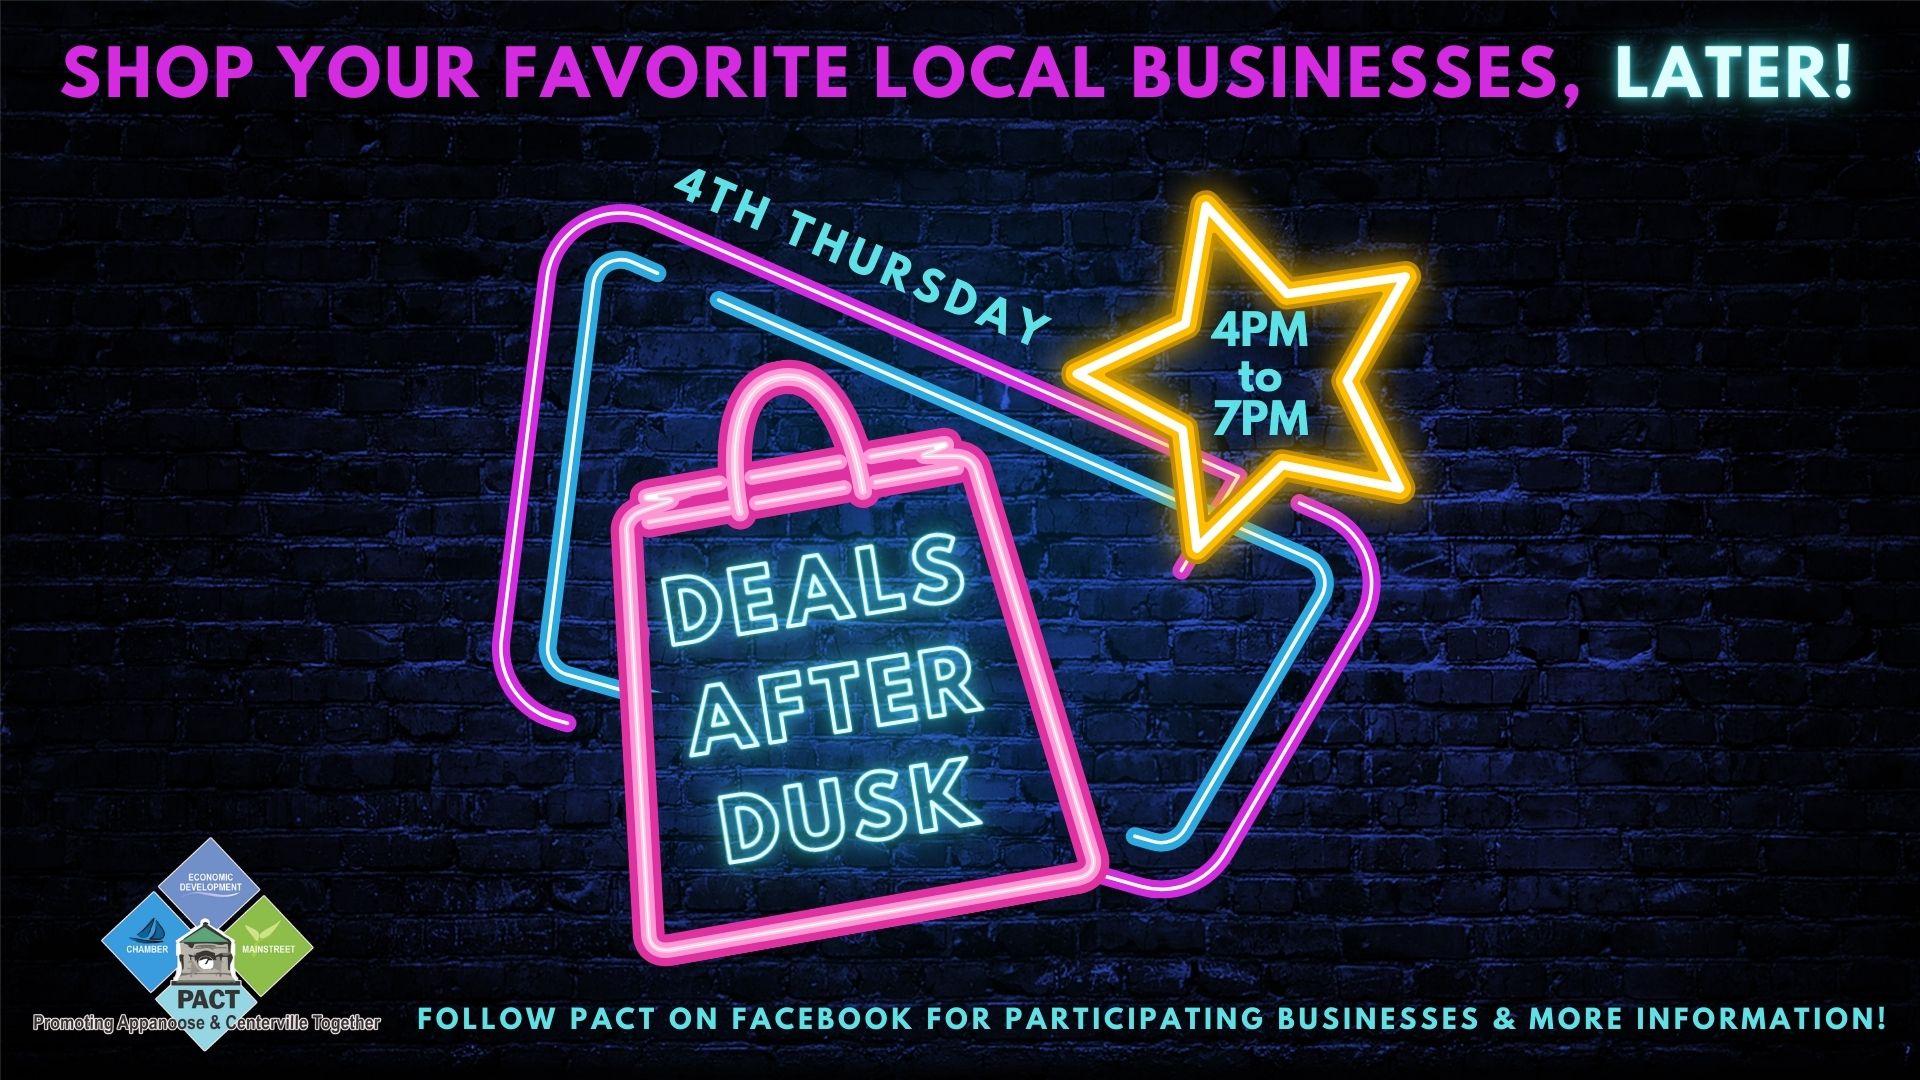 Deals After Dusk 4th Thursday Shopping Monthly Event